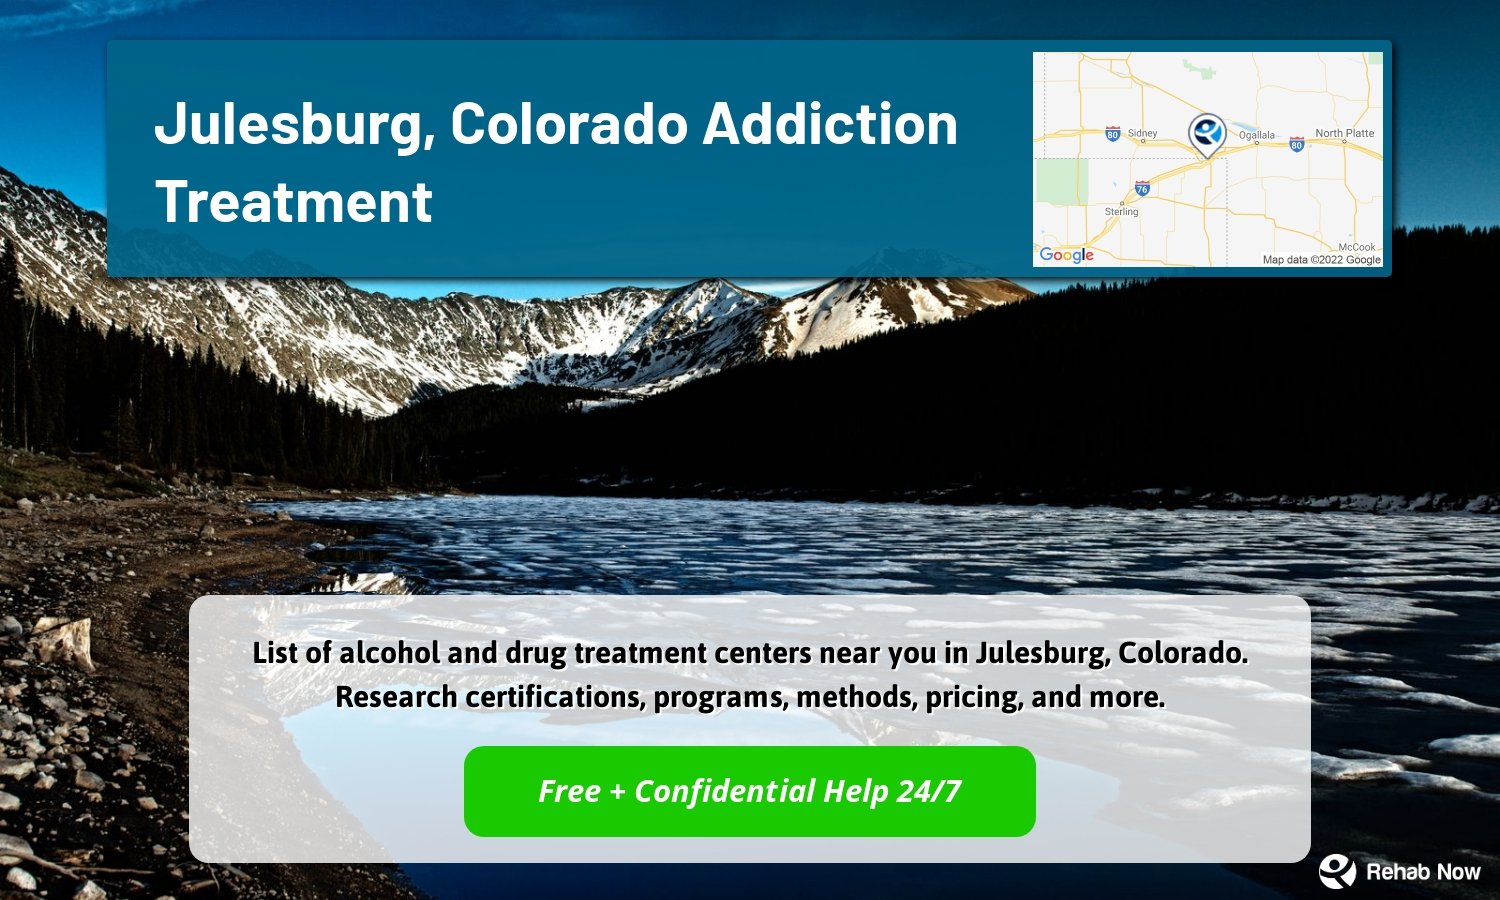 List of alcohol and drug treatment centers near you in Julesburg, Colorado. Research certifications, programs, methods, pricing, and more.